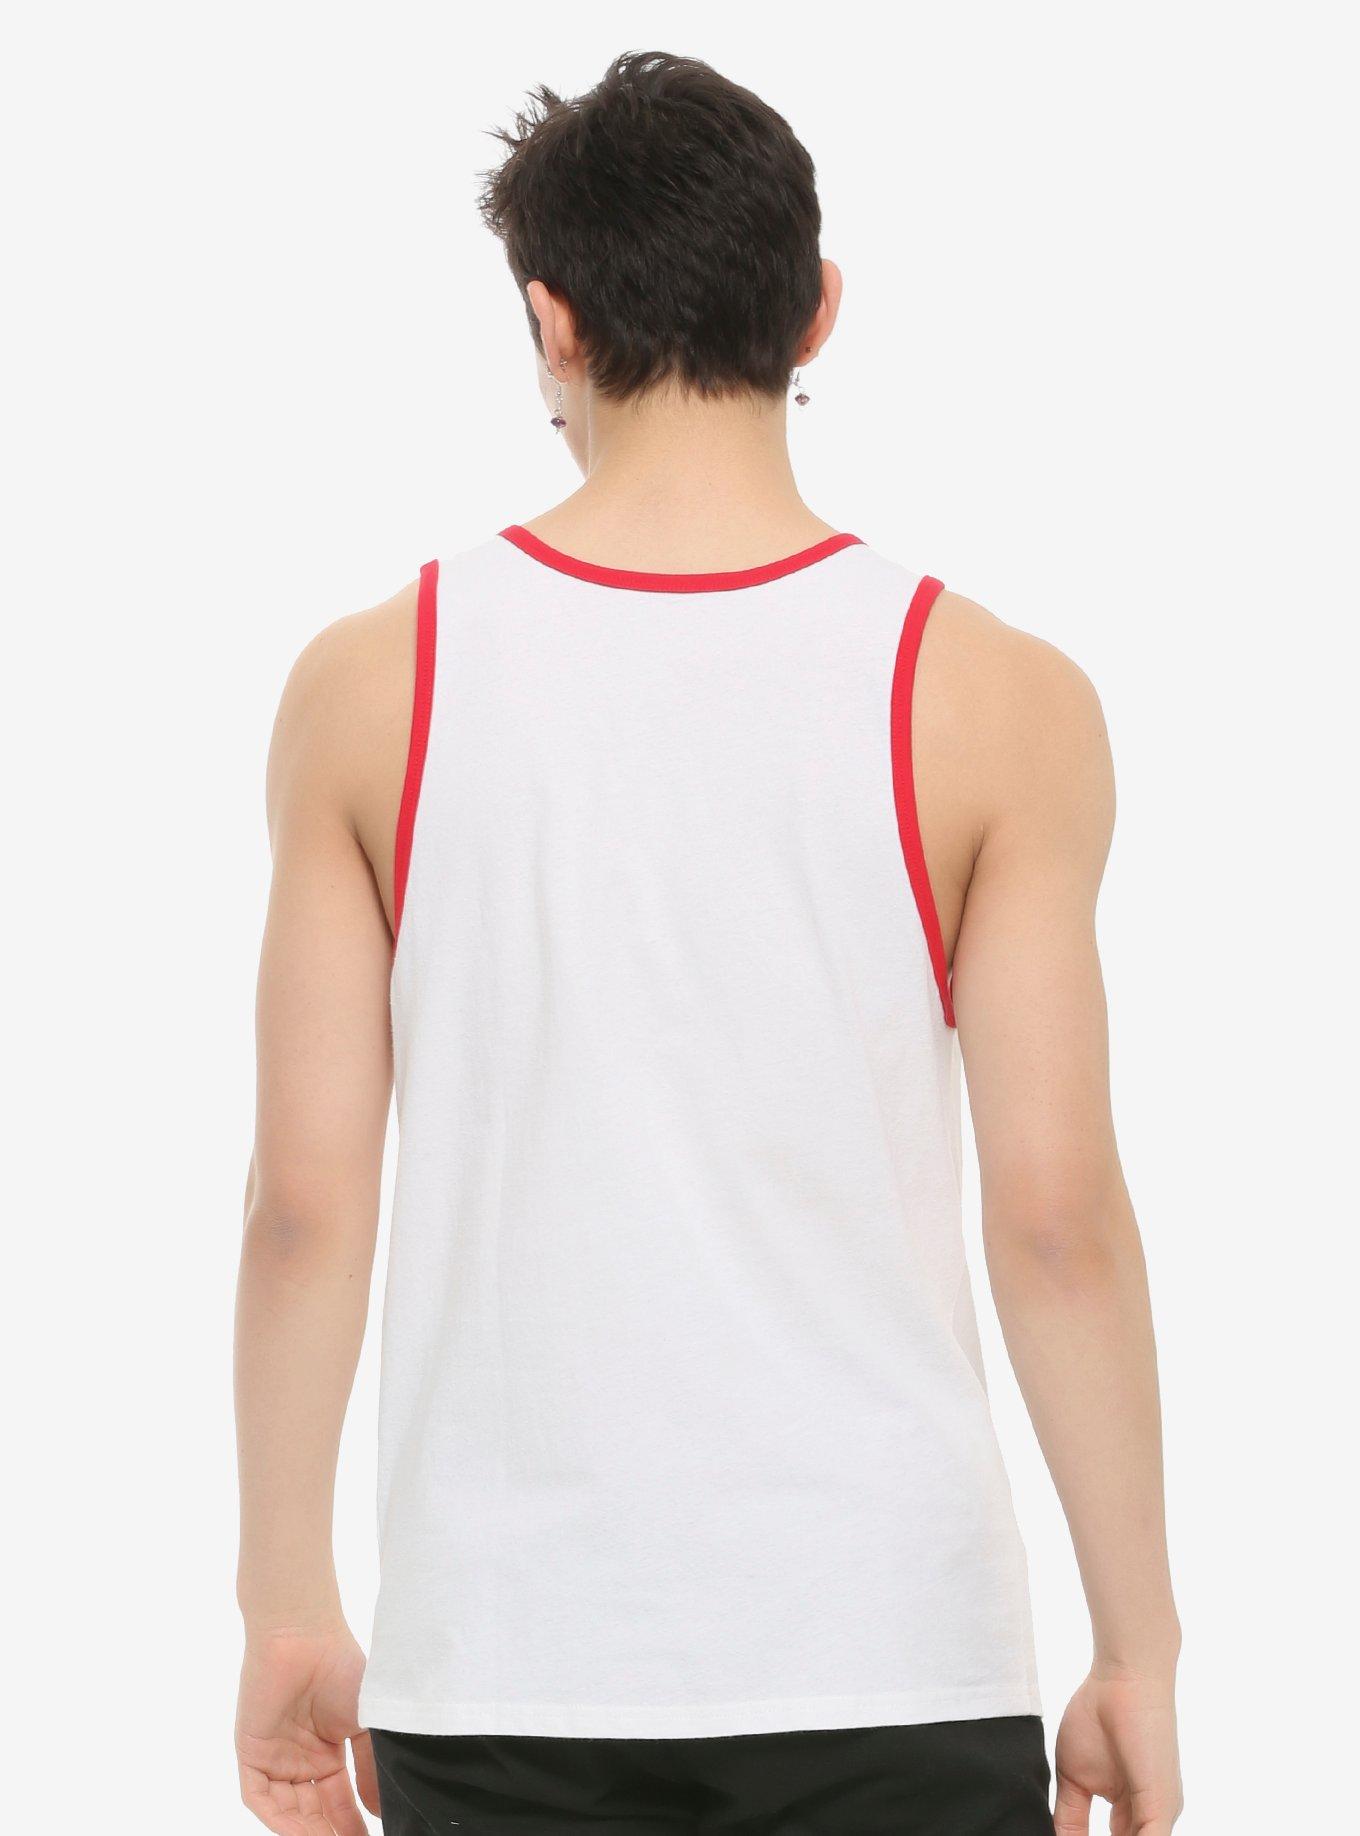 Hell's Gym Tank Top By HBDesign, WHITE, alternate